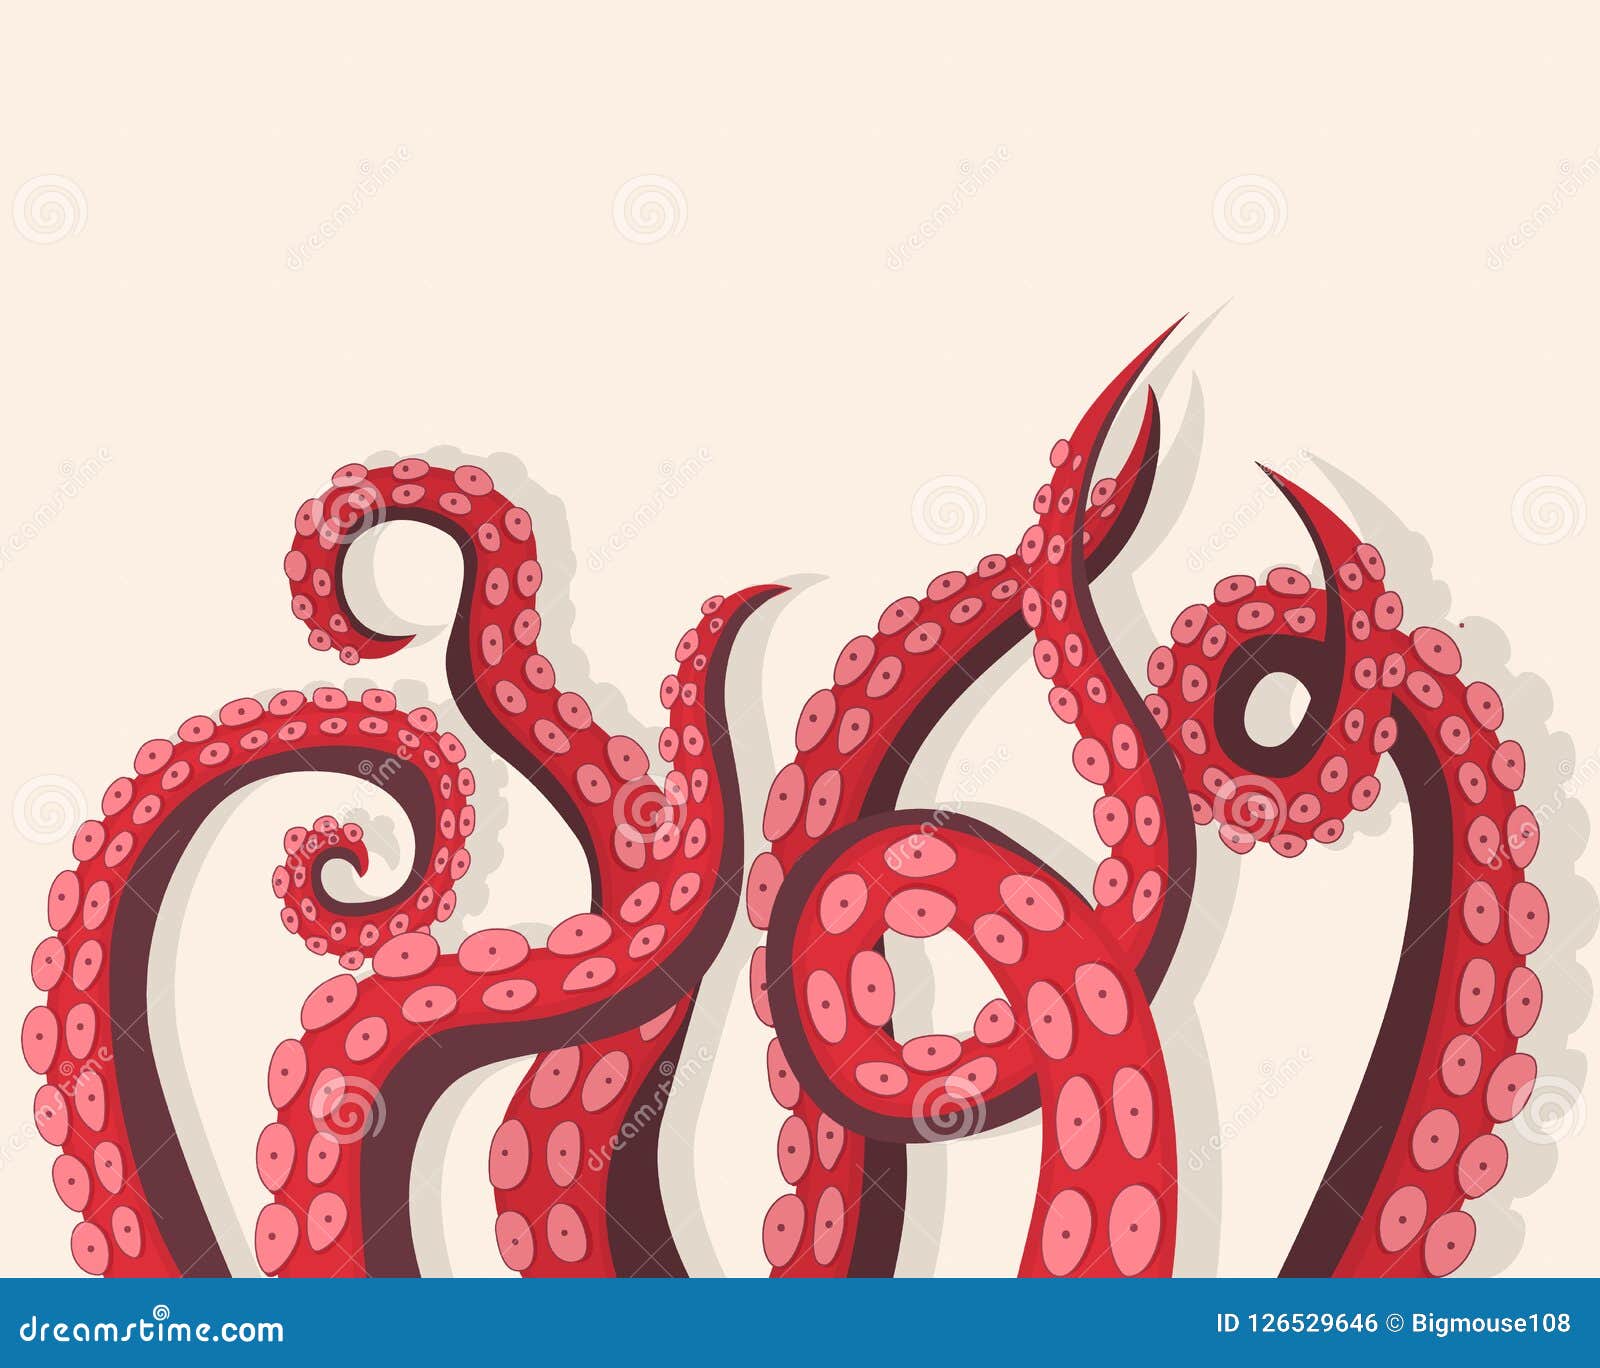 Card Octopus Tentacle Stock Illustrations – 501 Card Octopus Tentacle Stock  Illustrations, Vectors & Clipart - Dreamstime